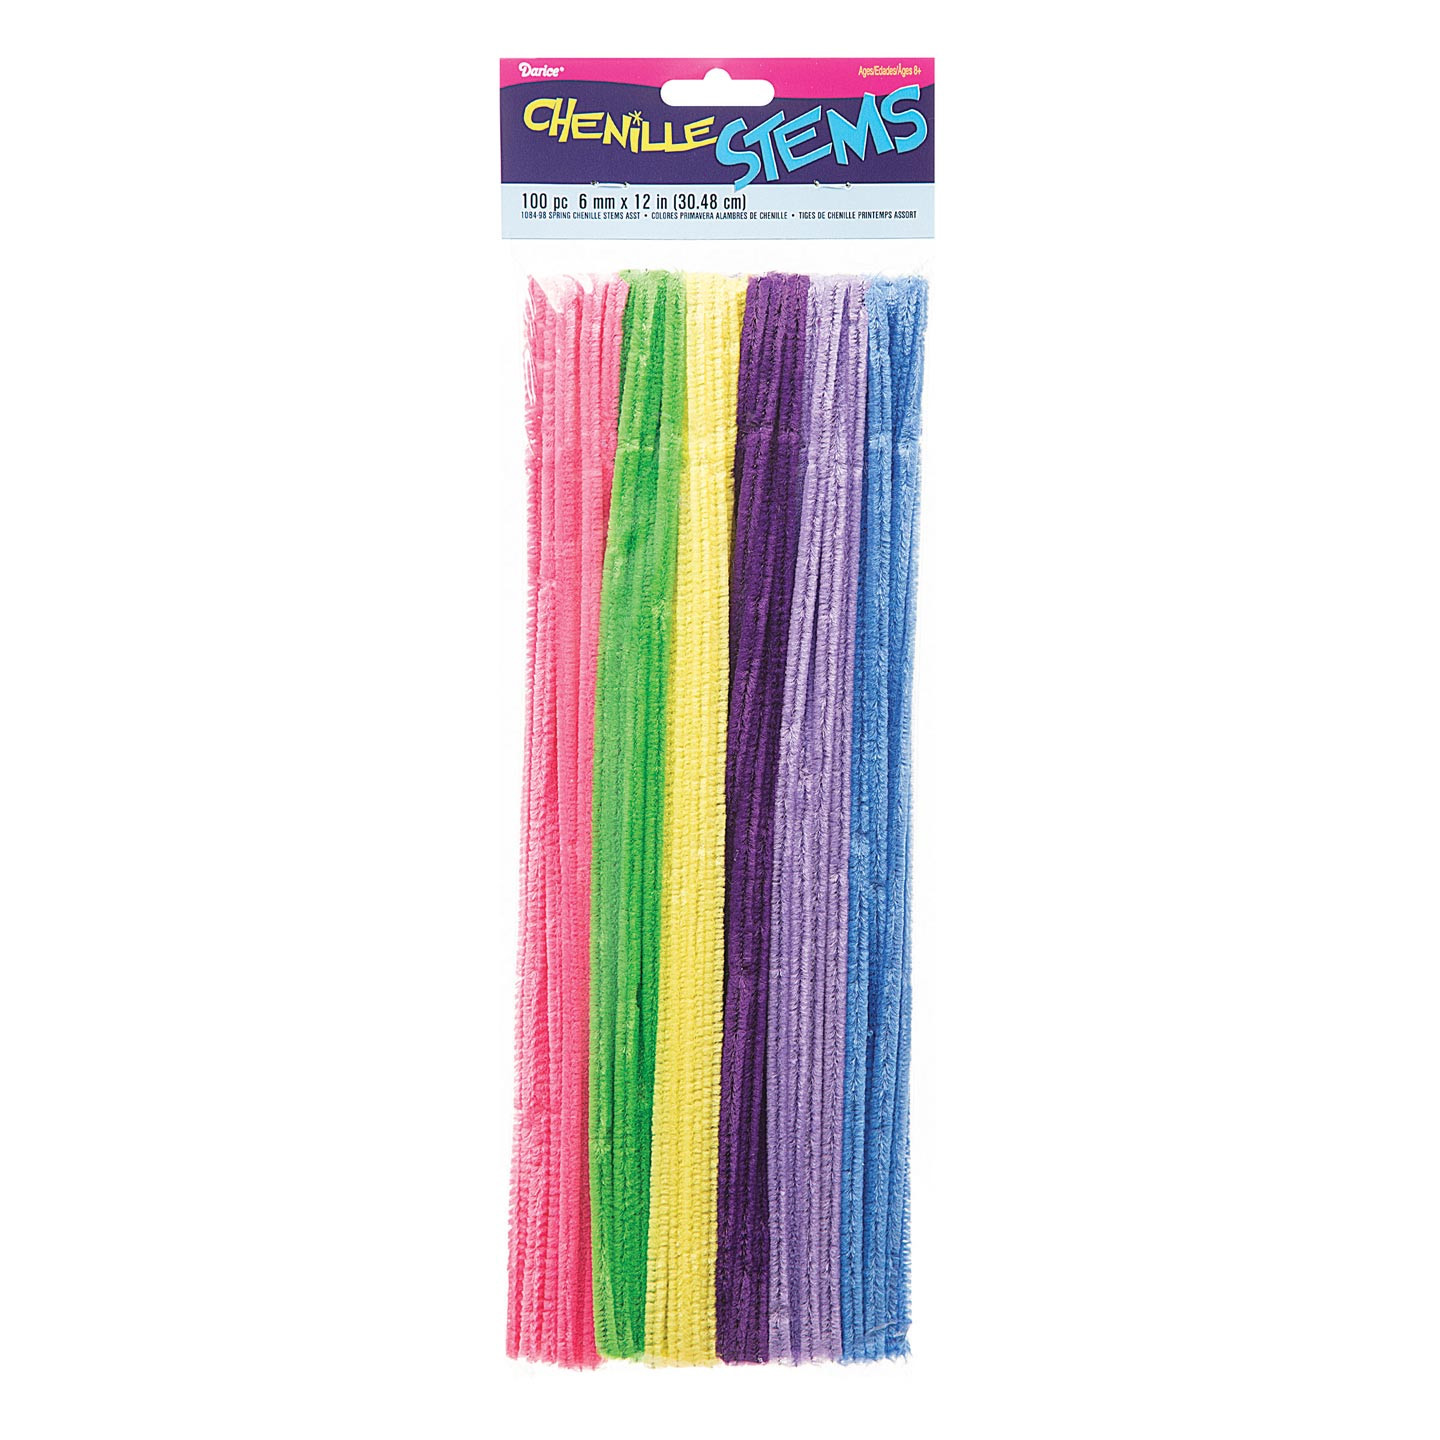 Neon Stems Pipe Cleaners, 6mm X 12 Inch, 100 Pack Blue Green